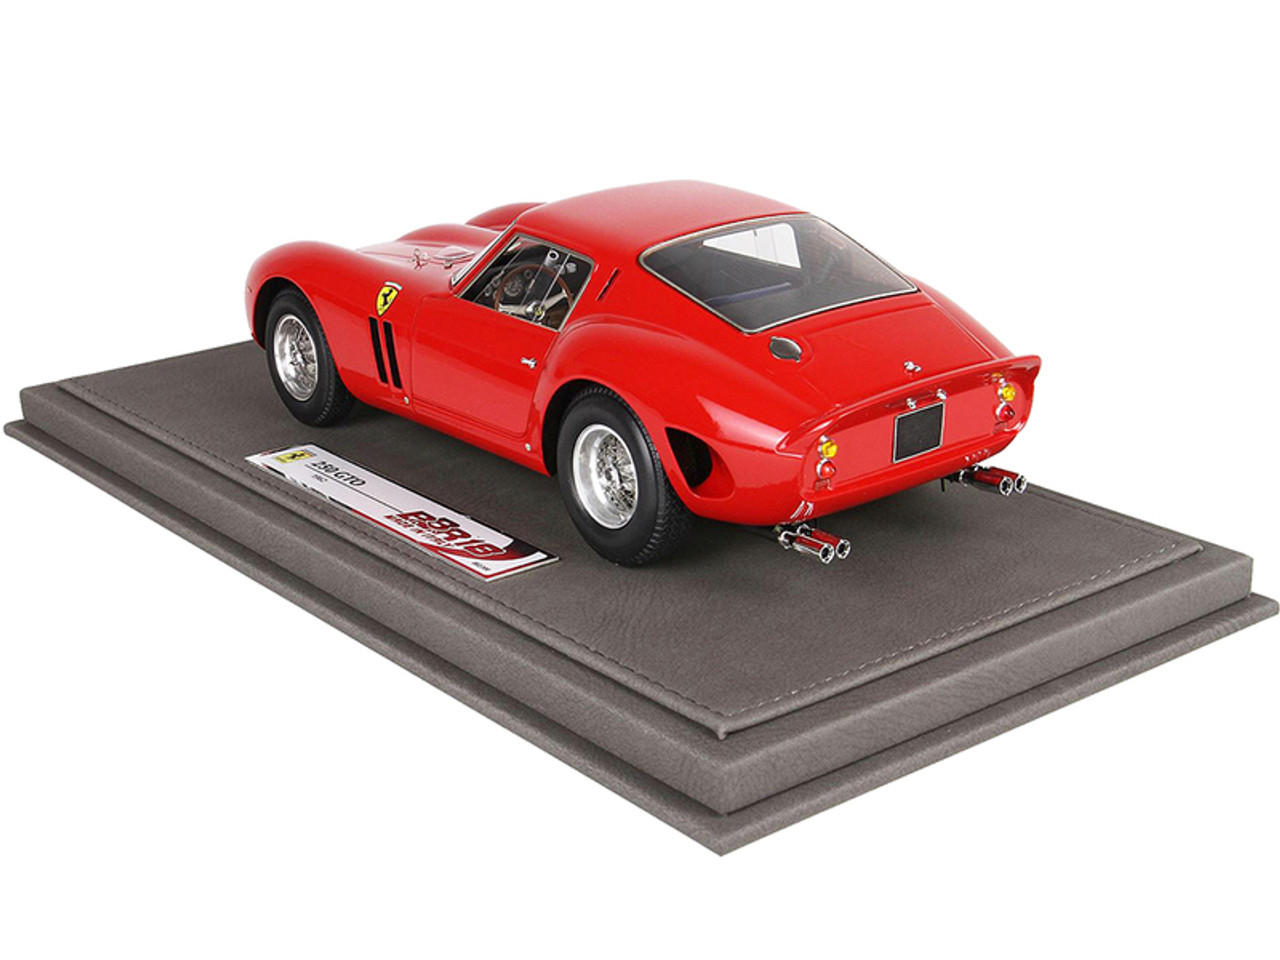 1962 Ferrari 250 GTO Red with DISPLAY CASE Limited Edition to 300 pieces  Worldwide 1/18 Model Car by BBR